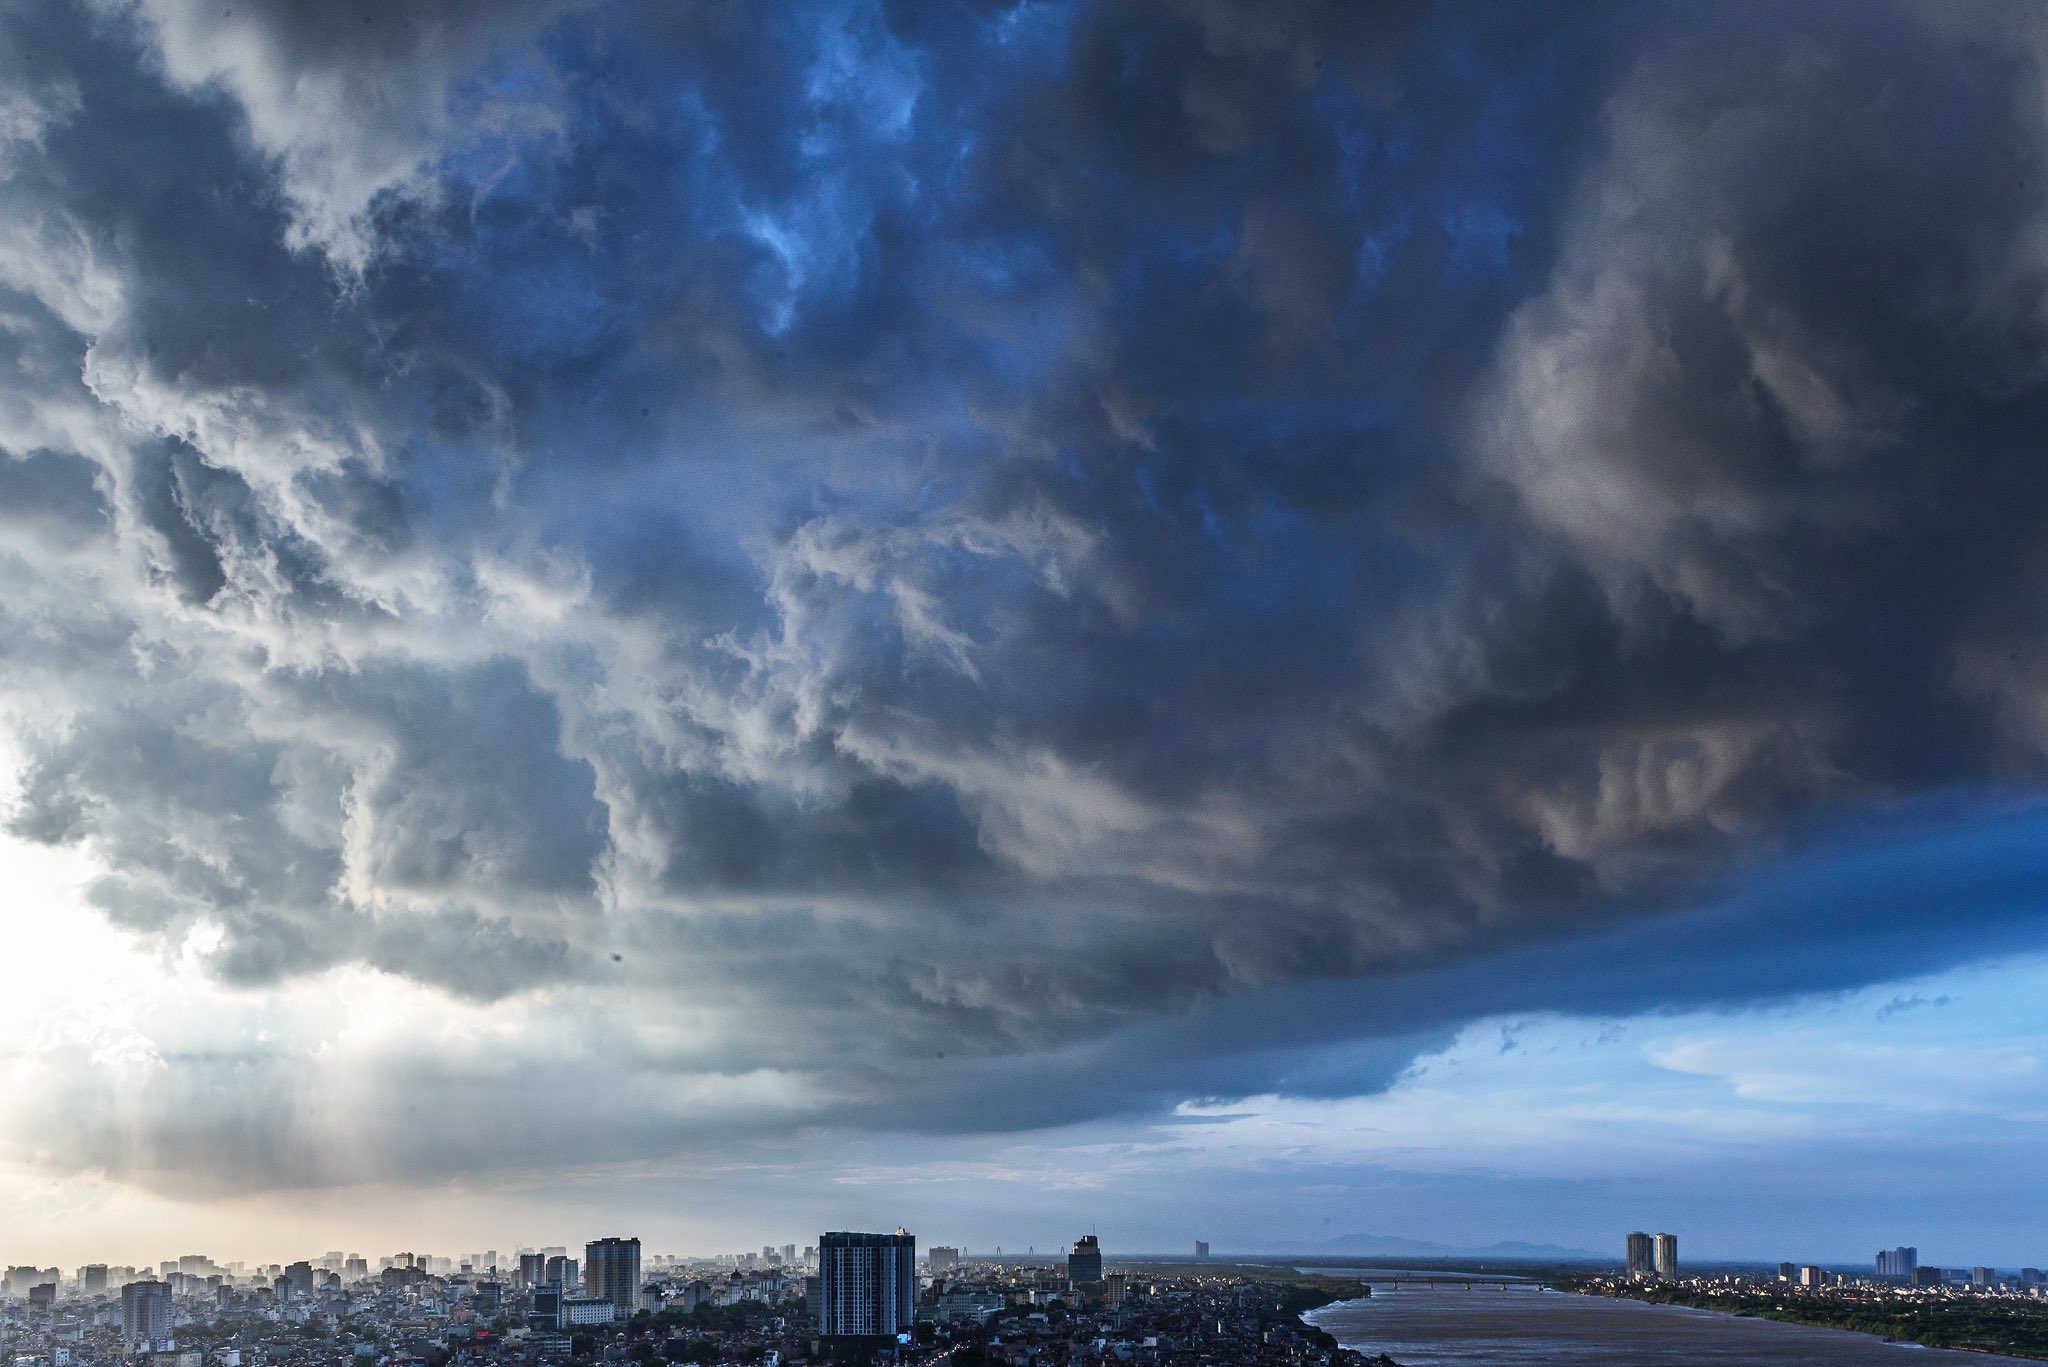 2nd Place Storm is coming in Hanoi, Vietnam by PRABU MOHAN @prabu201